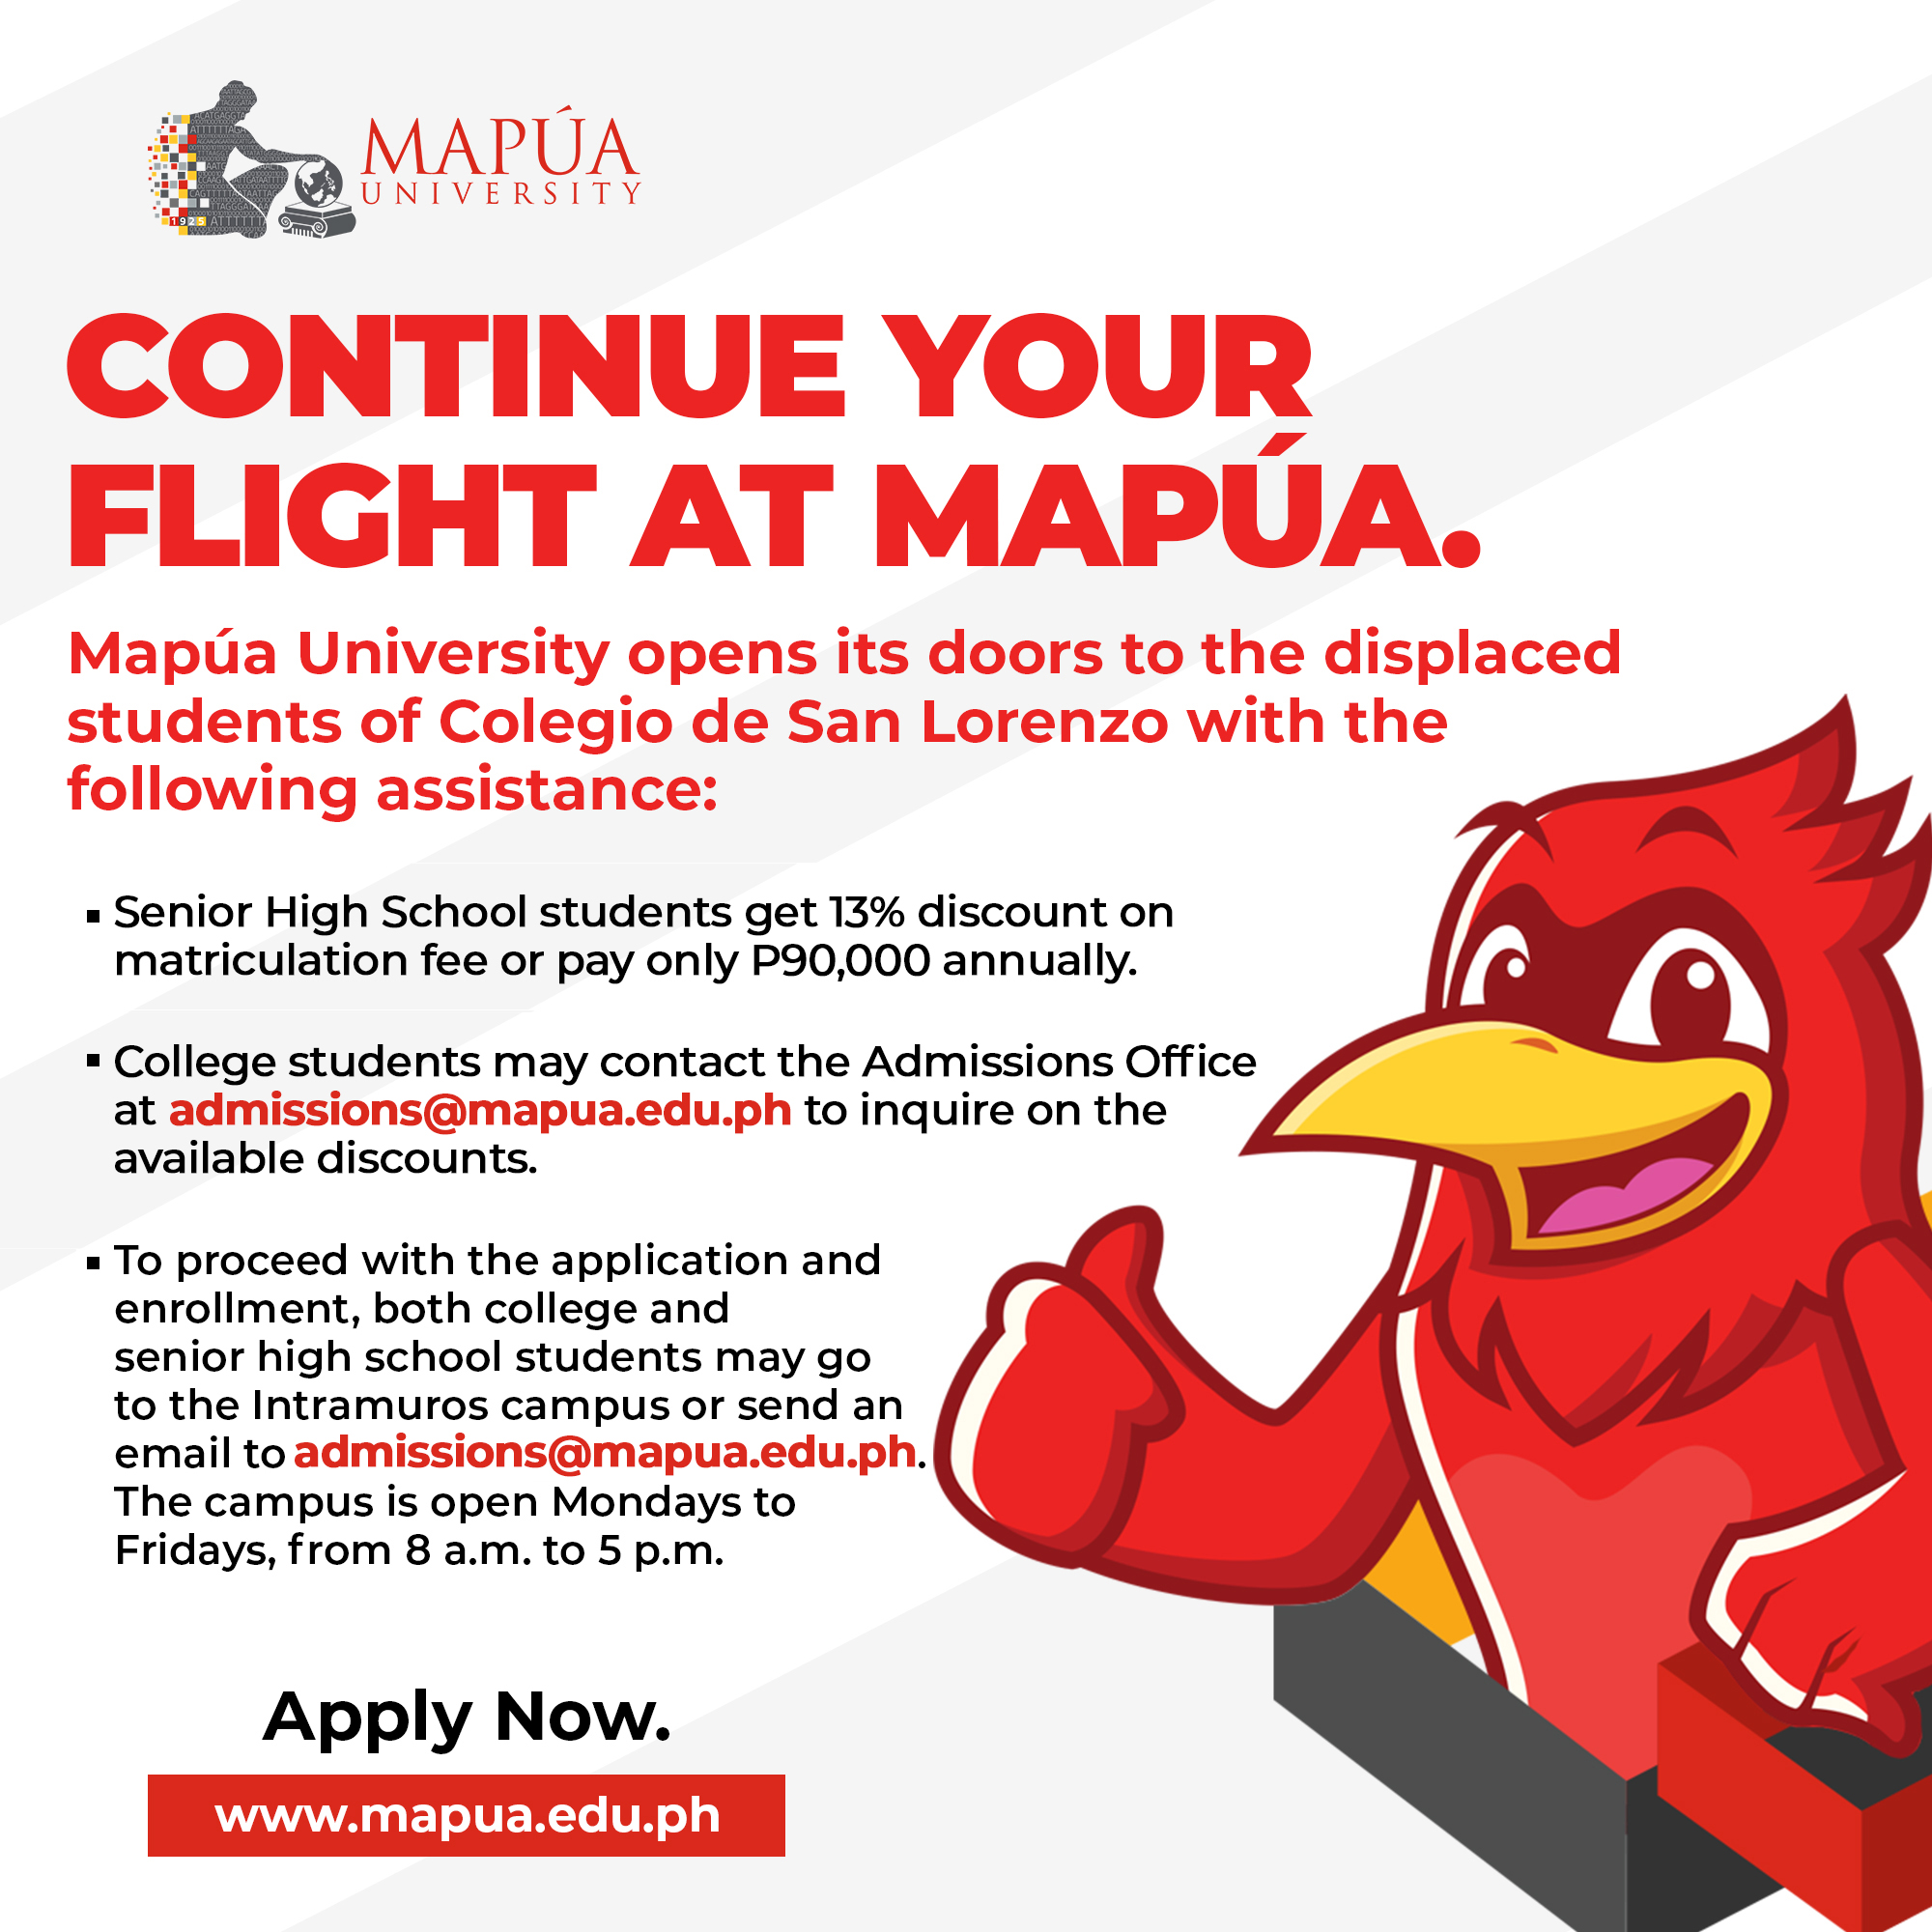 Take Flight: Apply Now — Office of Admissions